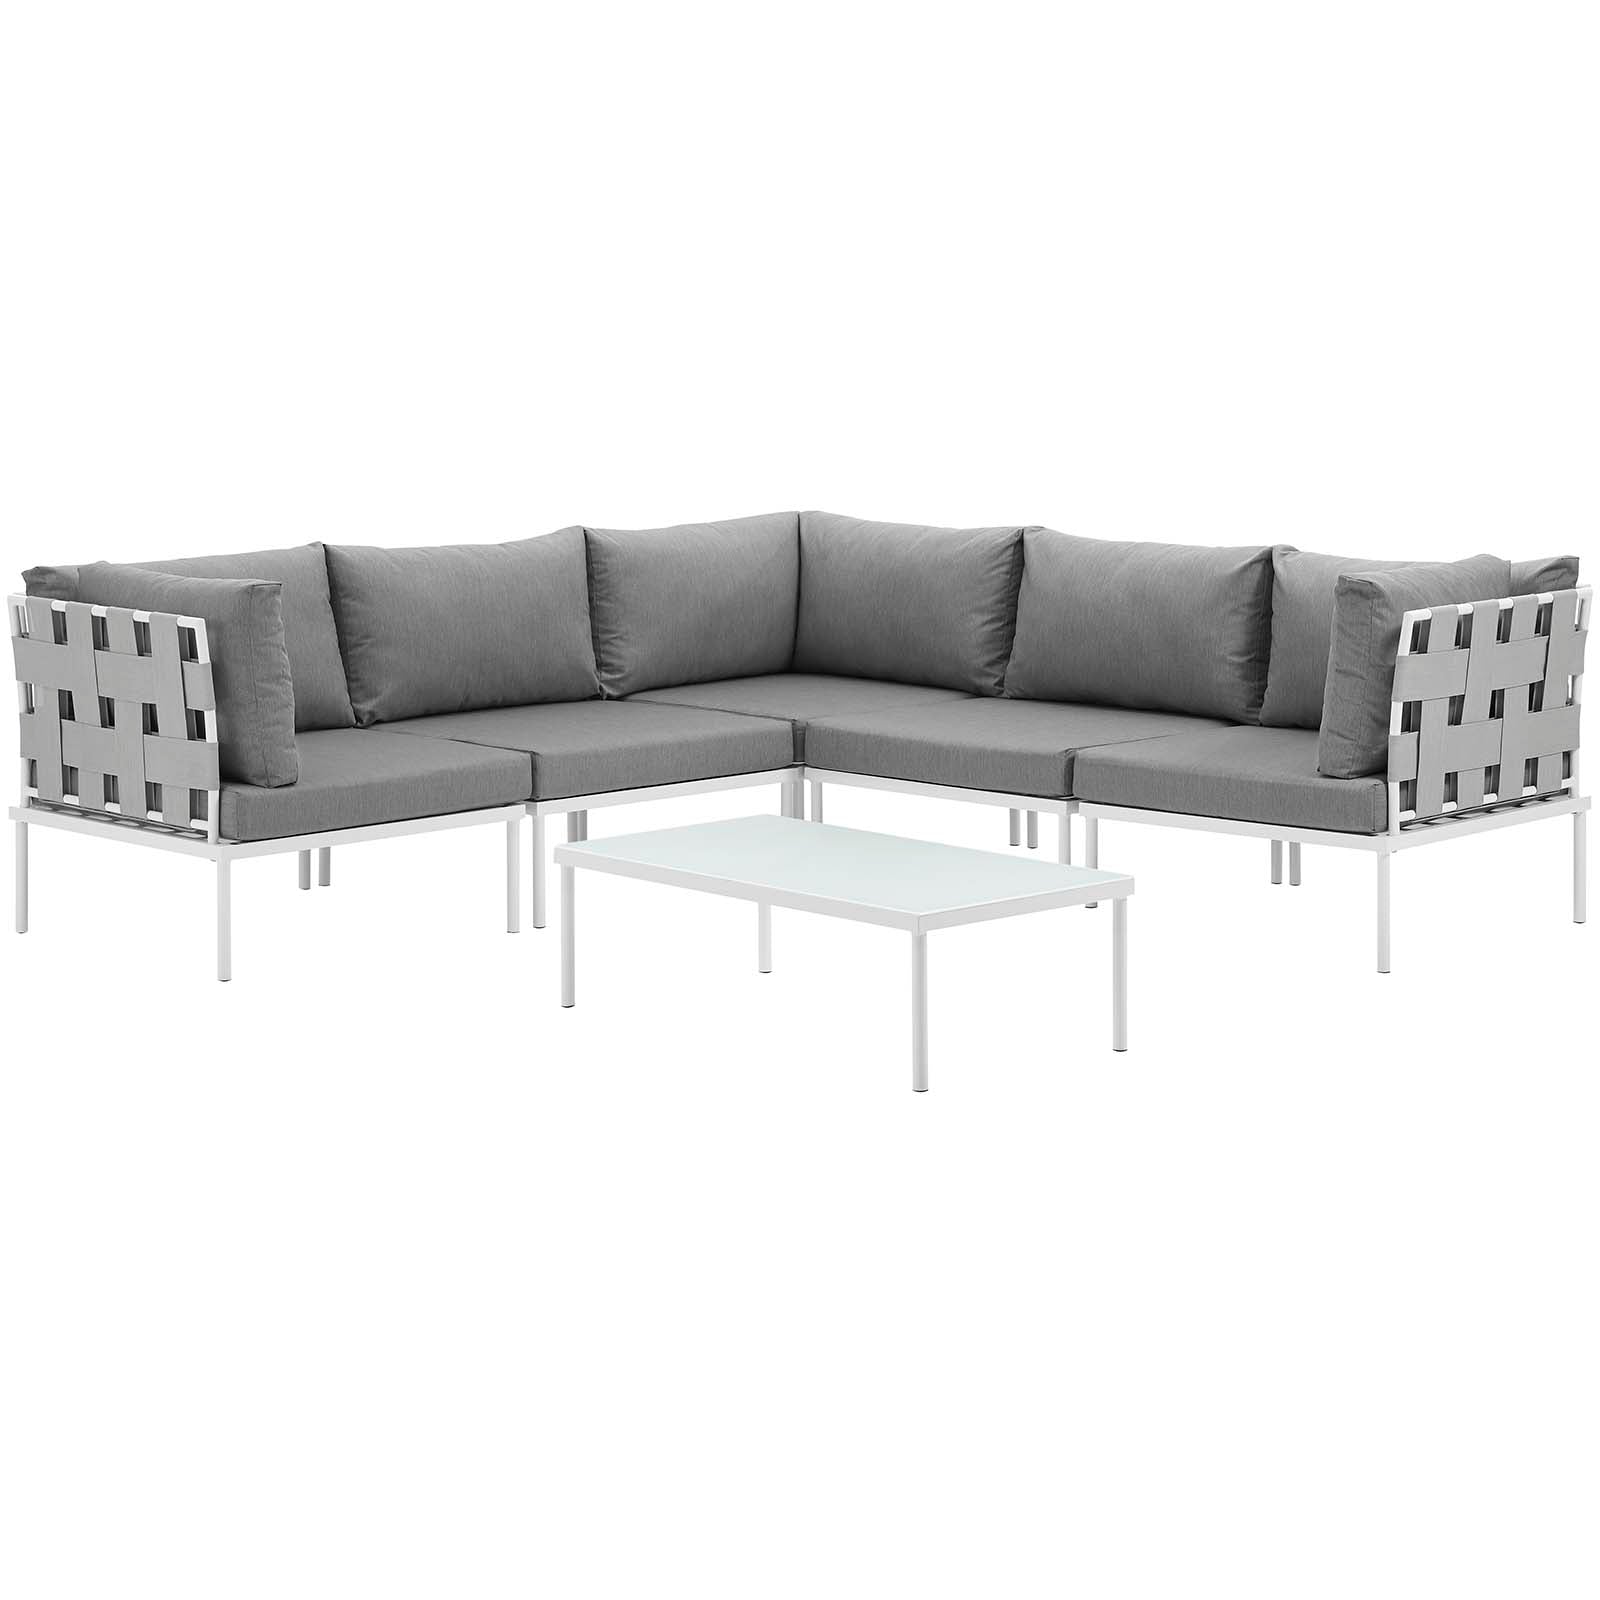 Modway Outdoor Conversation Sets - Harmony 6 Piece Outdoor Patio Sectional Sofa Set White Gray